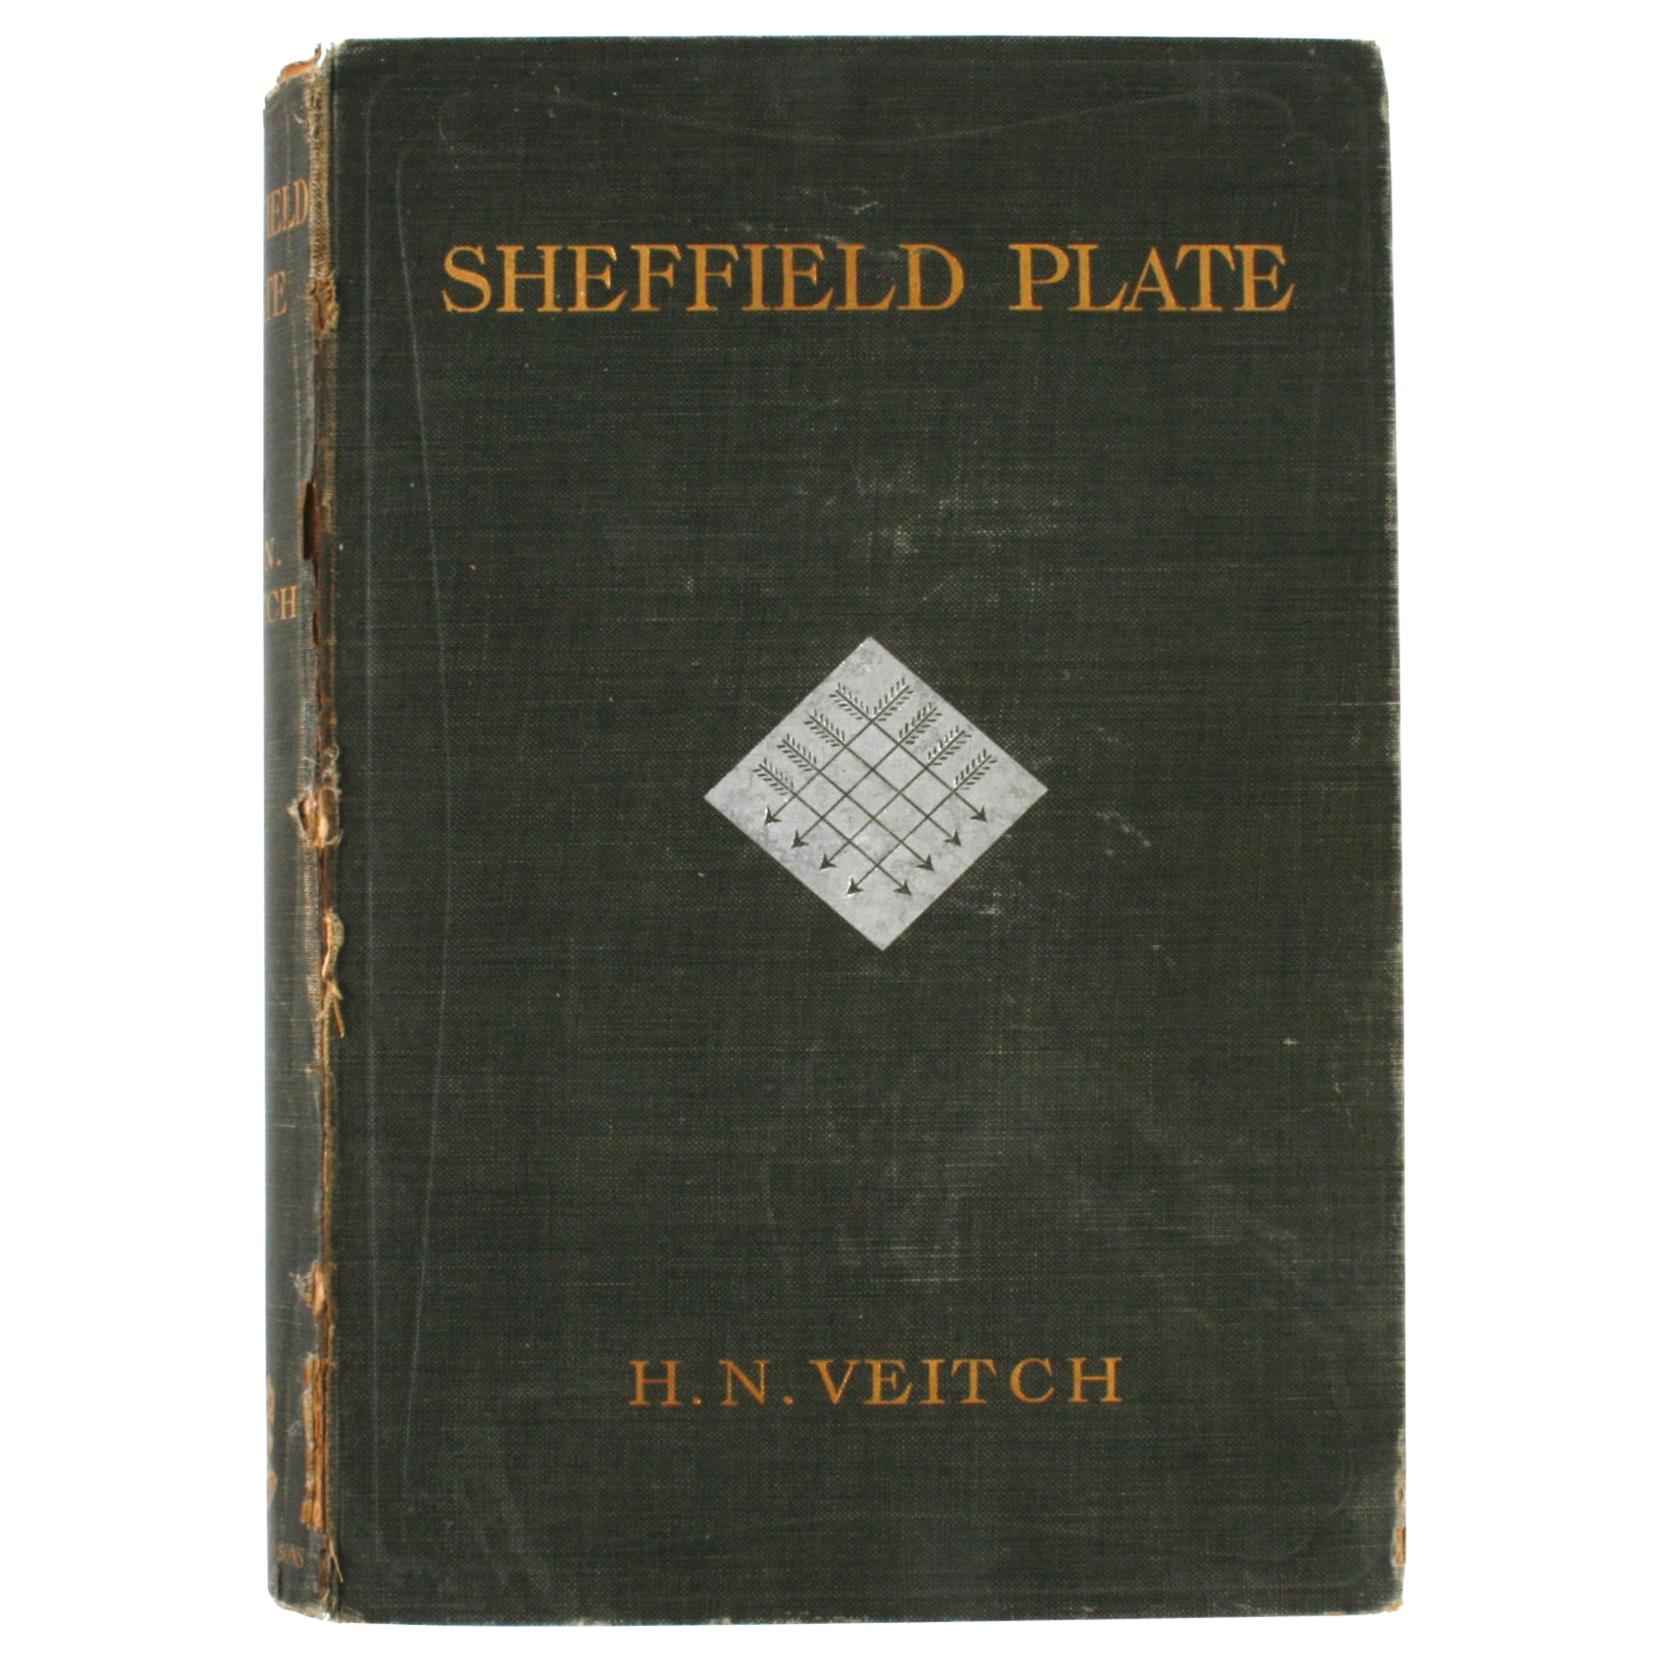 Sheffield Plate by H.N. Veitch, 1908, 1st Edition